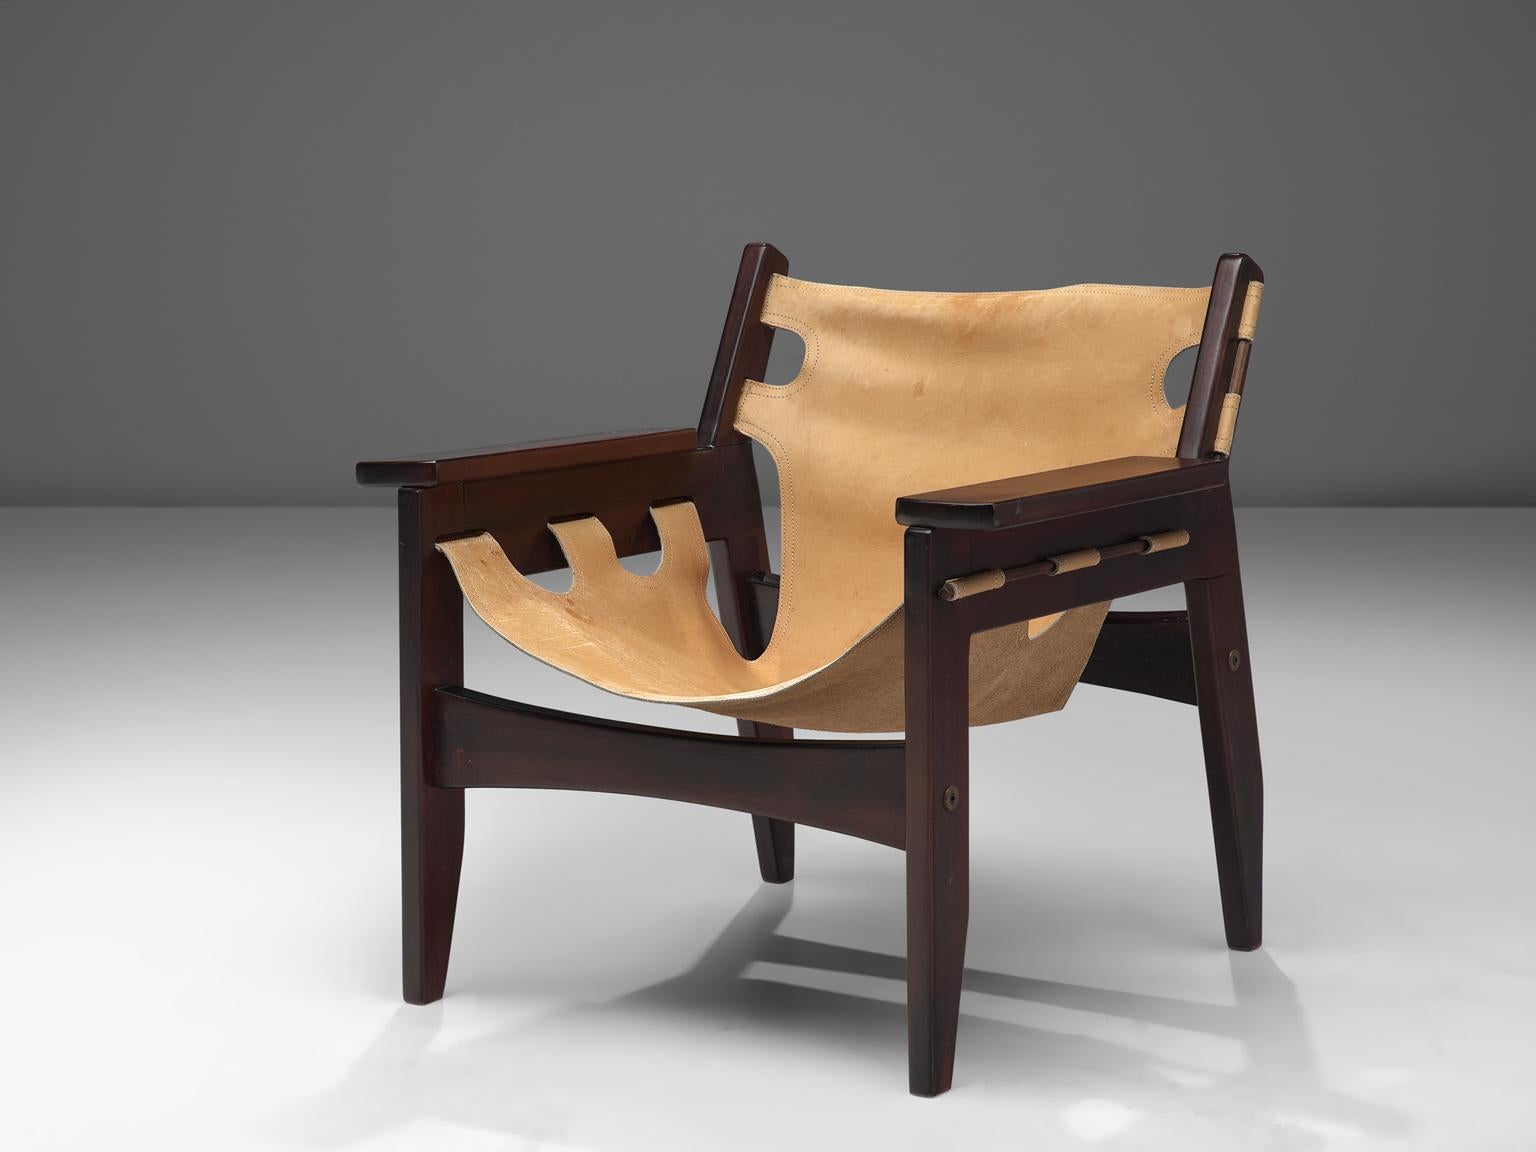 Sergio Rodrigues for OCA, pair of 'Kilin' armchairs, rosewood and leather, Brazil, 1973. 

'Kilin' easy chair in Jacaranda rosewood and beige leather. This chair has a sturdy appearance and is designed with high attention to detail. The thick